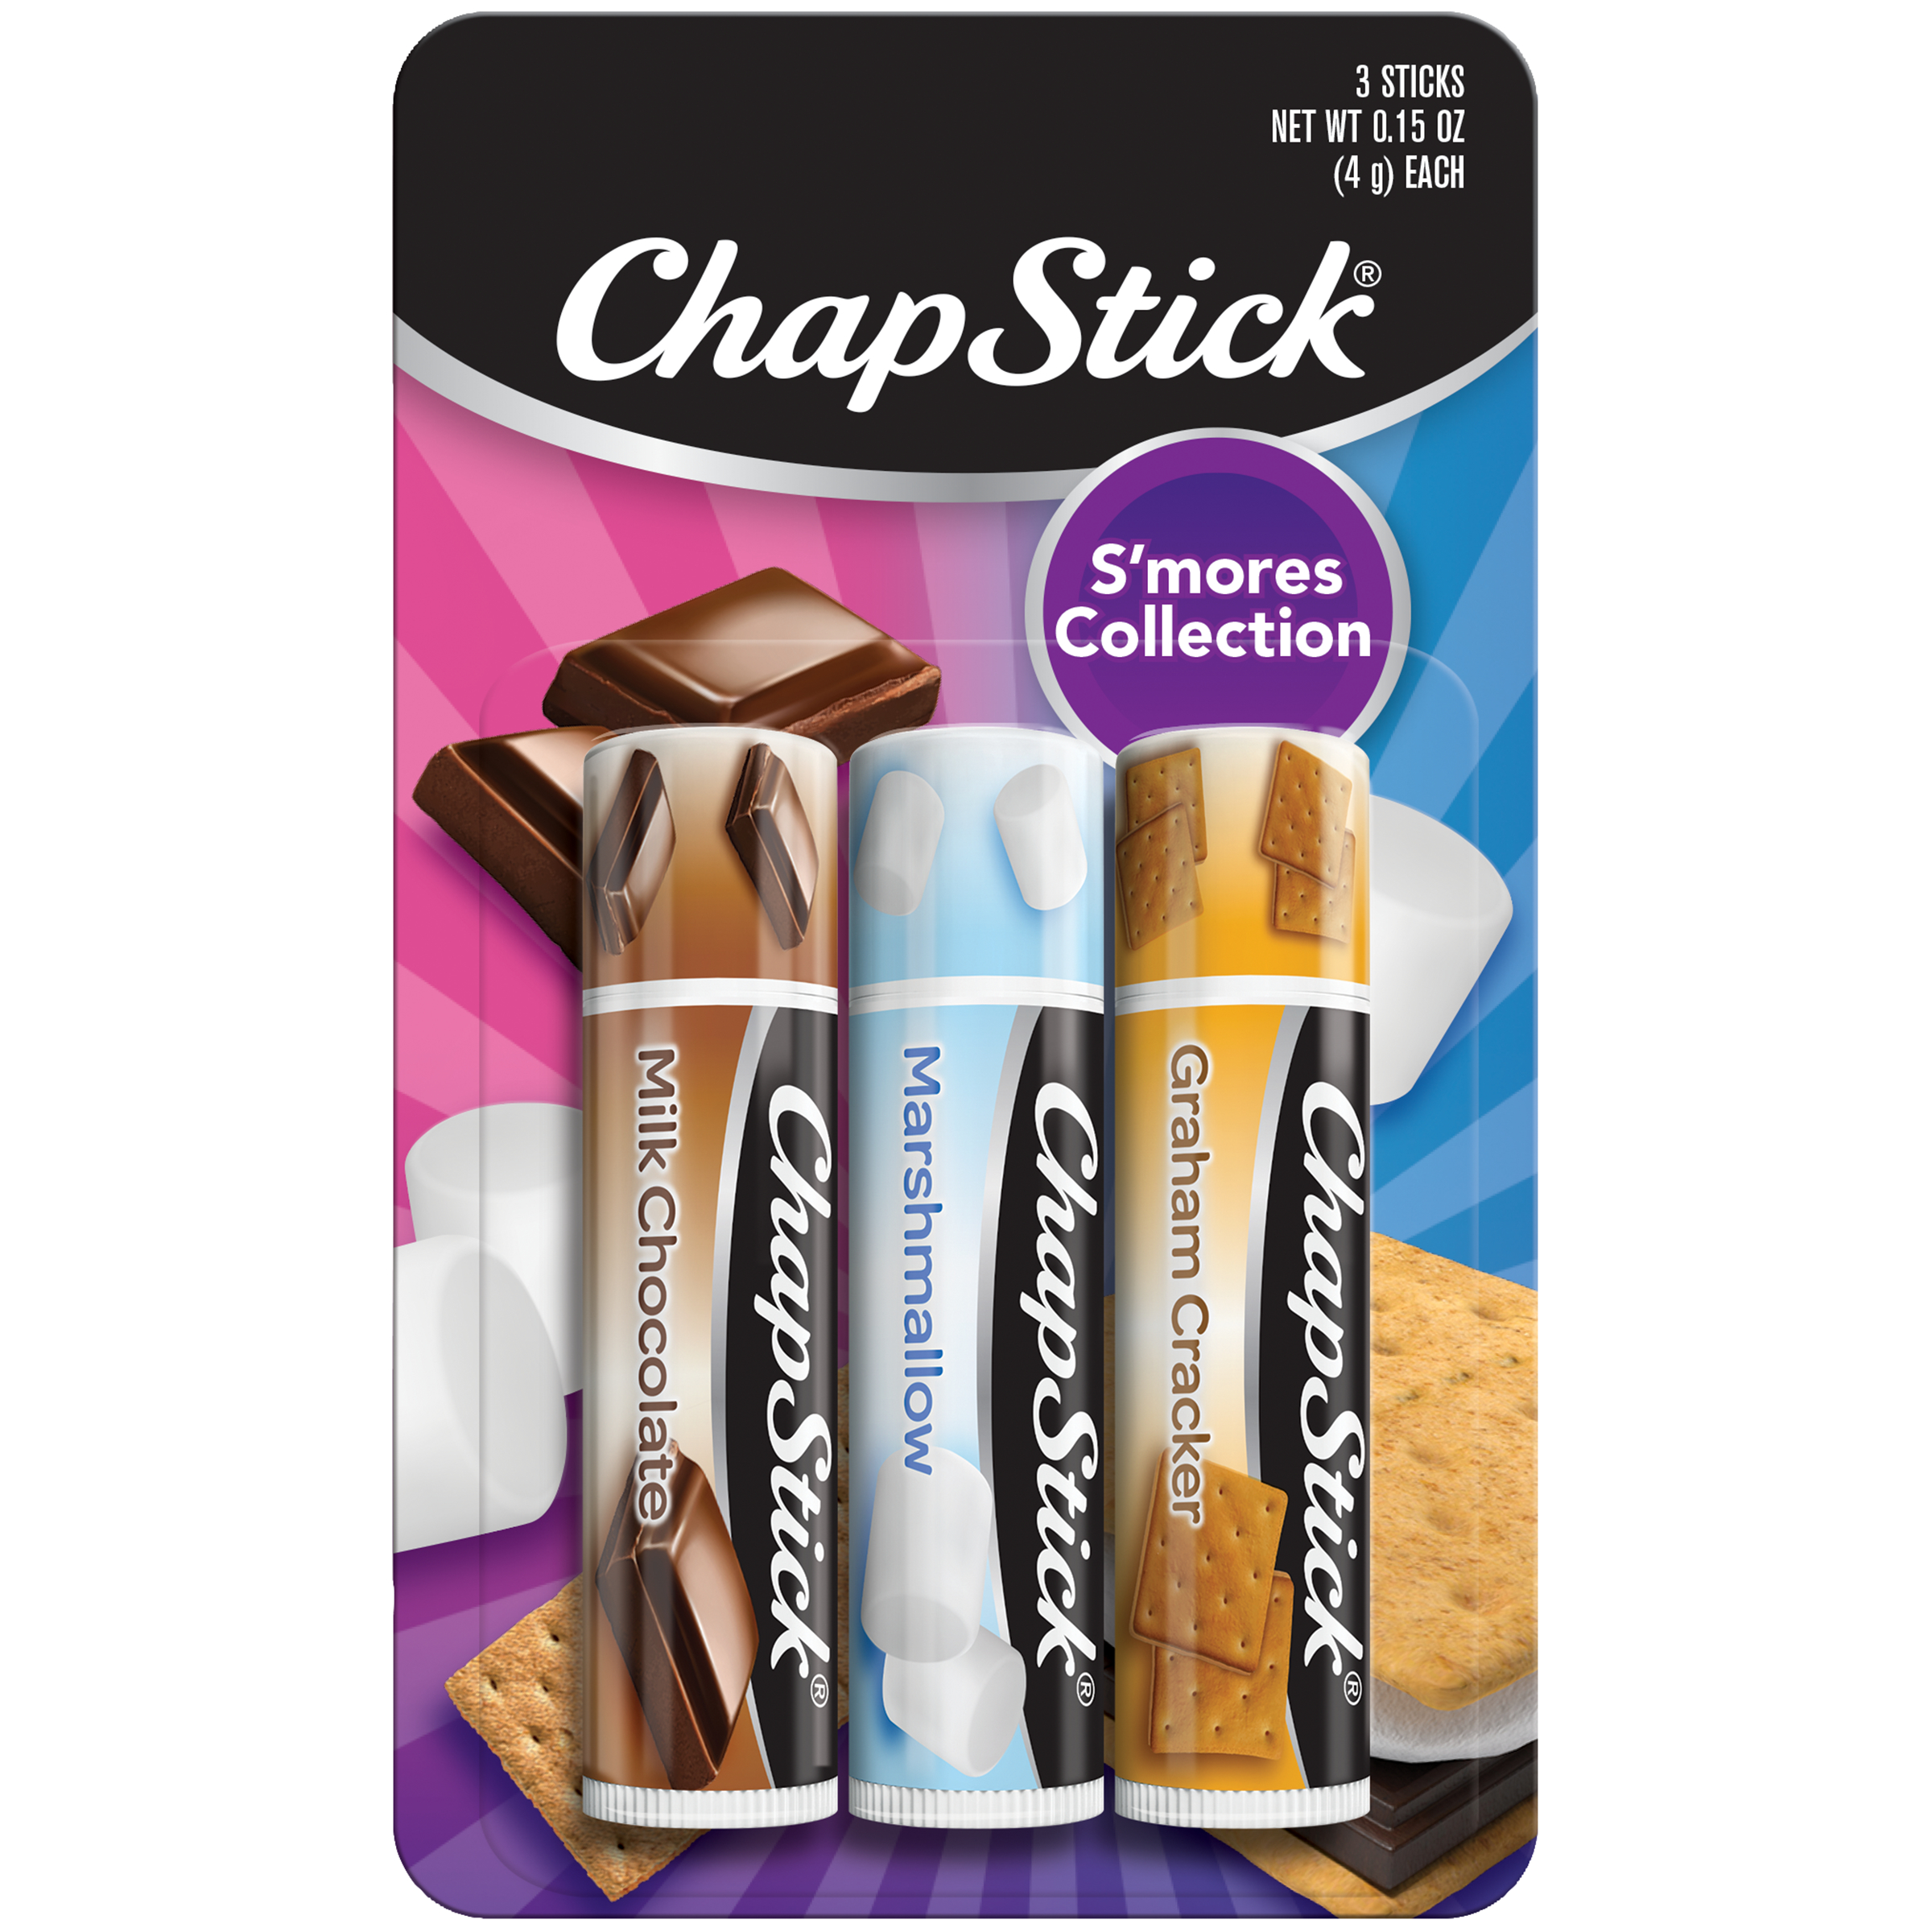 ChapStick S'mores Collection Flavored Lip Balm, Multi-Flavored, 0.15 Oz, 3 Pack - image 1 of 6